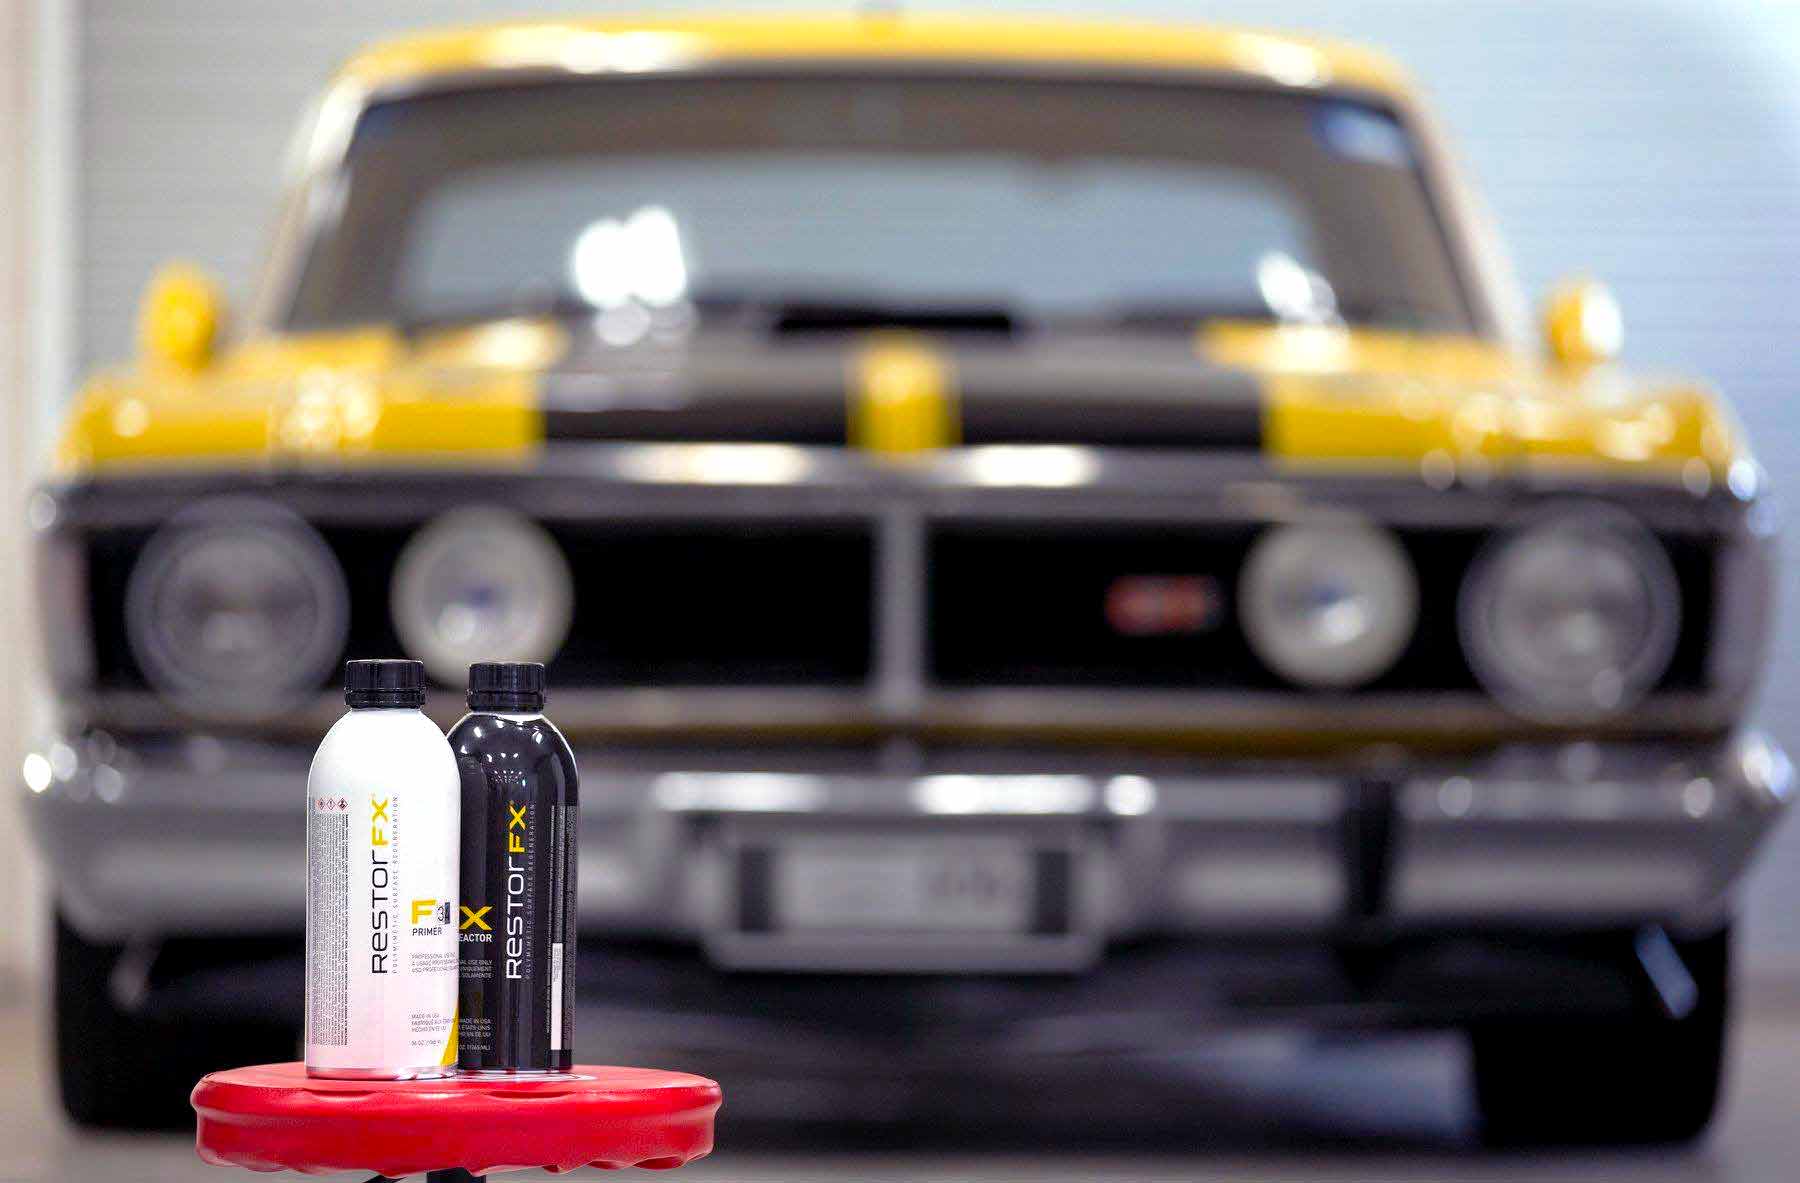 RestorFX F and X restoration product bottles with a shiny yellow vintage sports car in the background